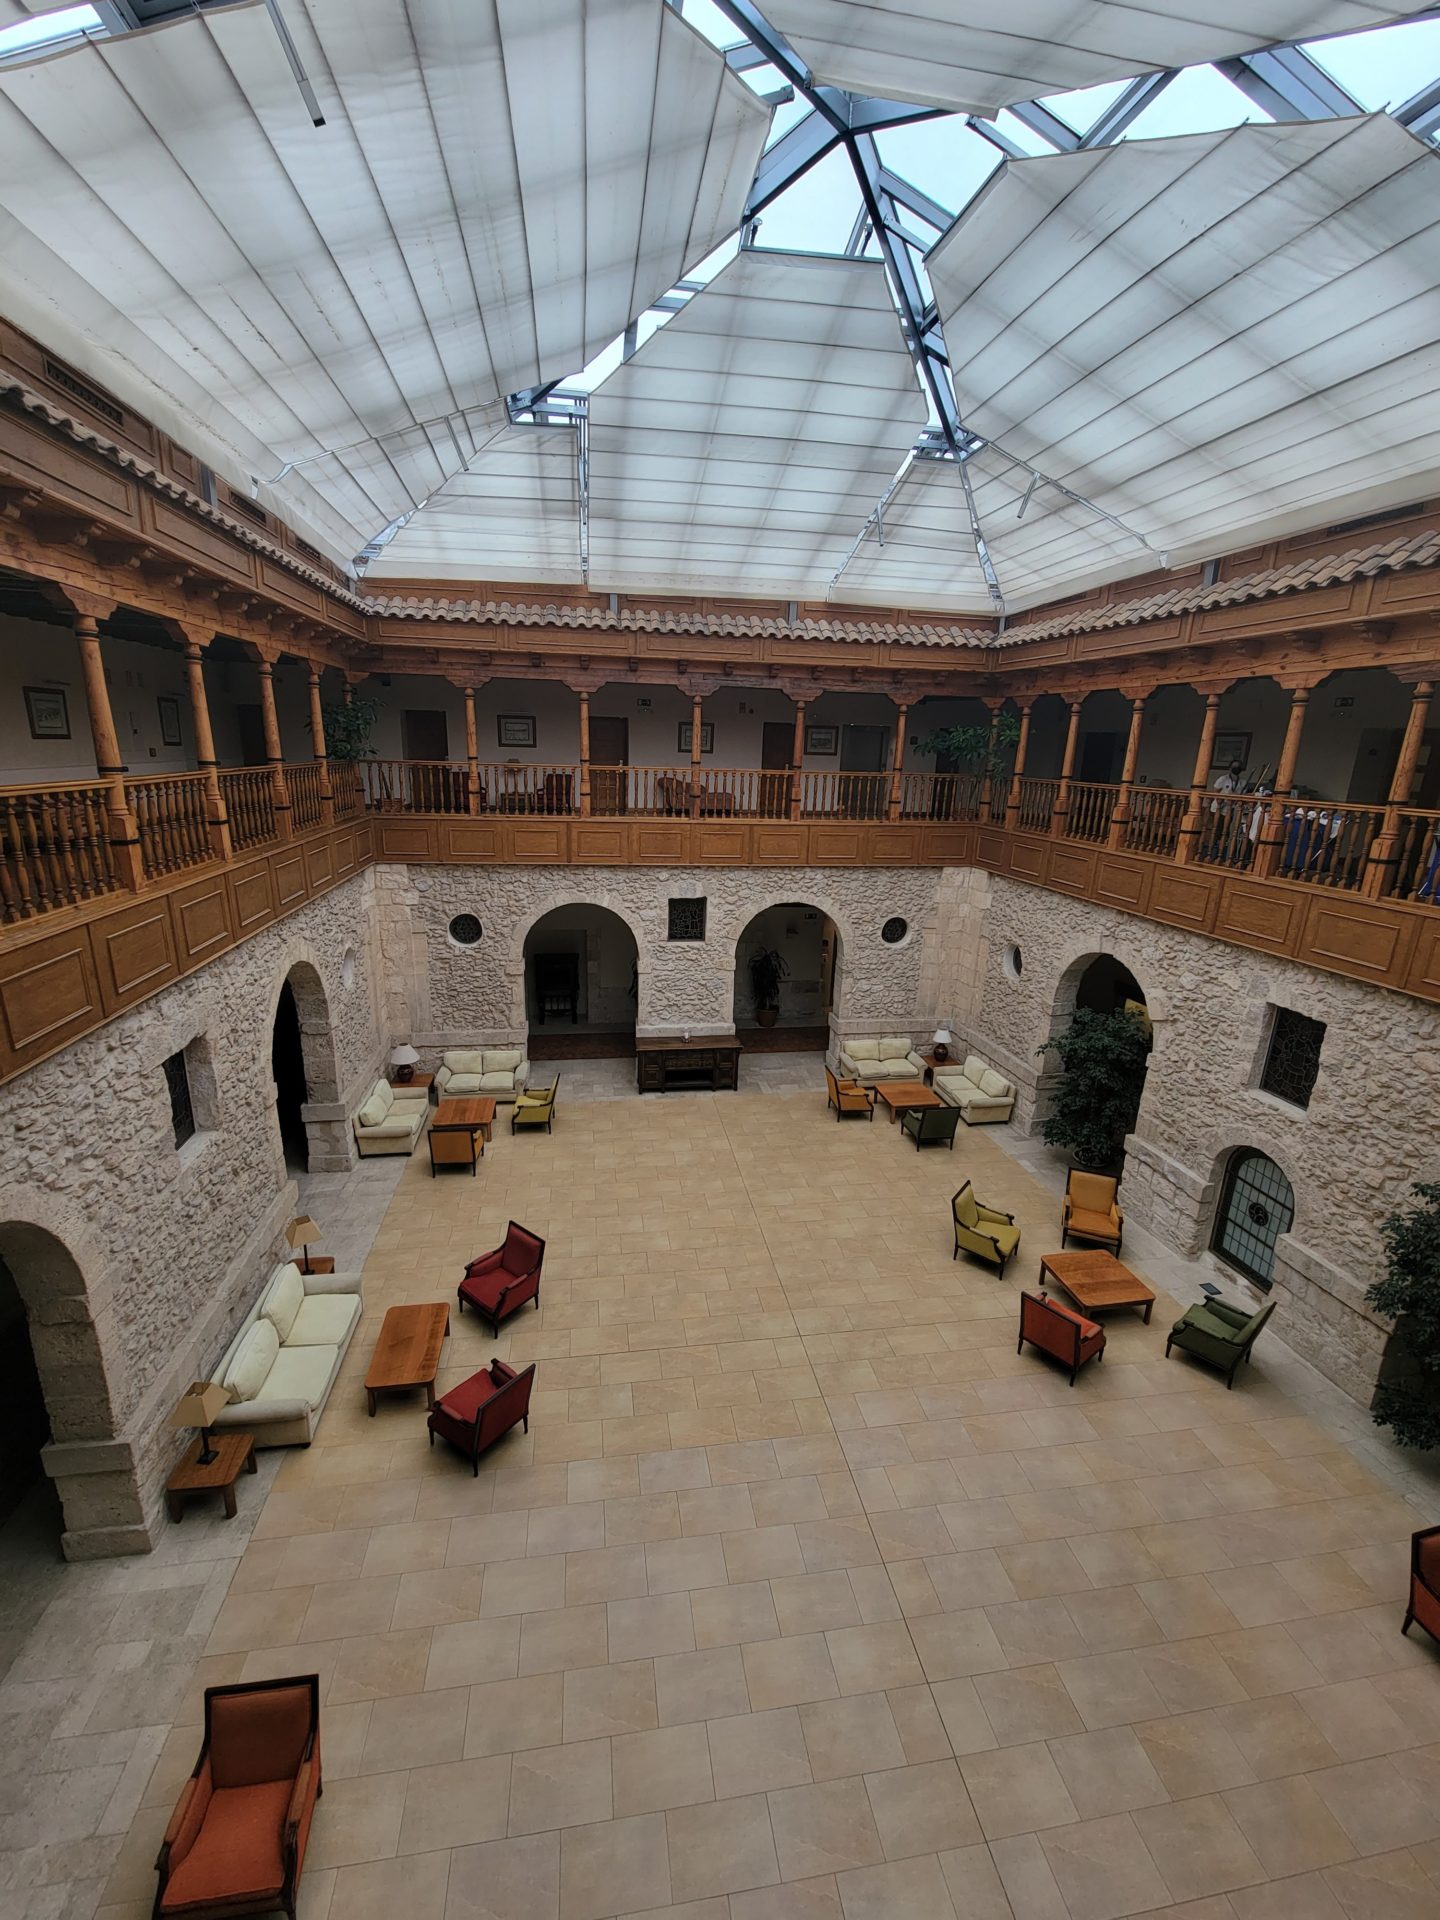 a room with a large stone building with a glass roof